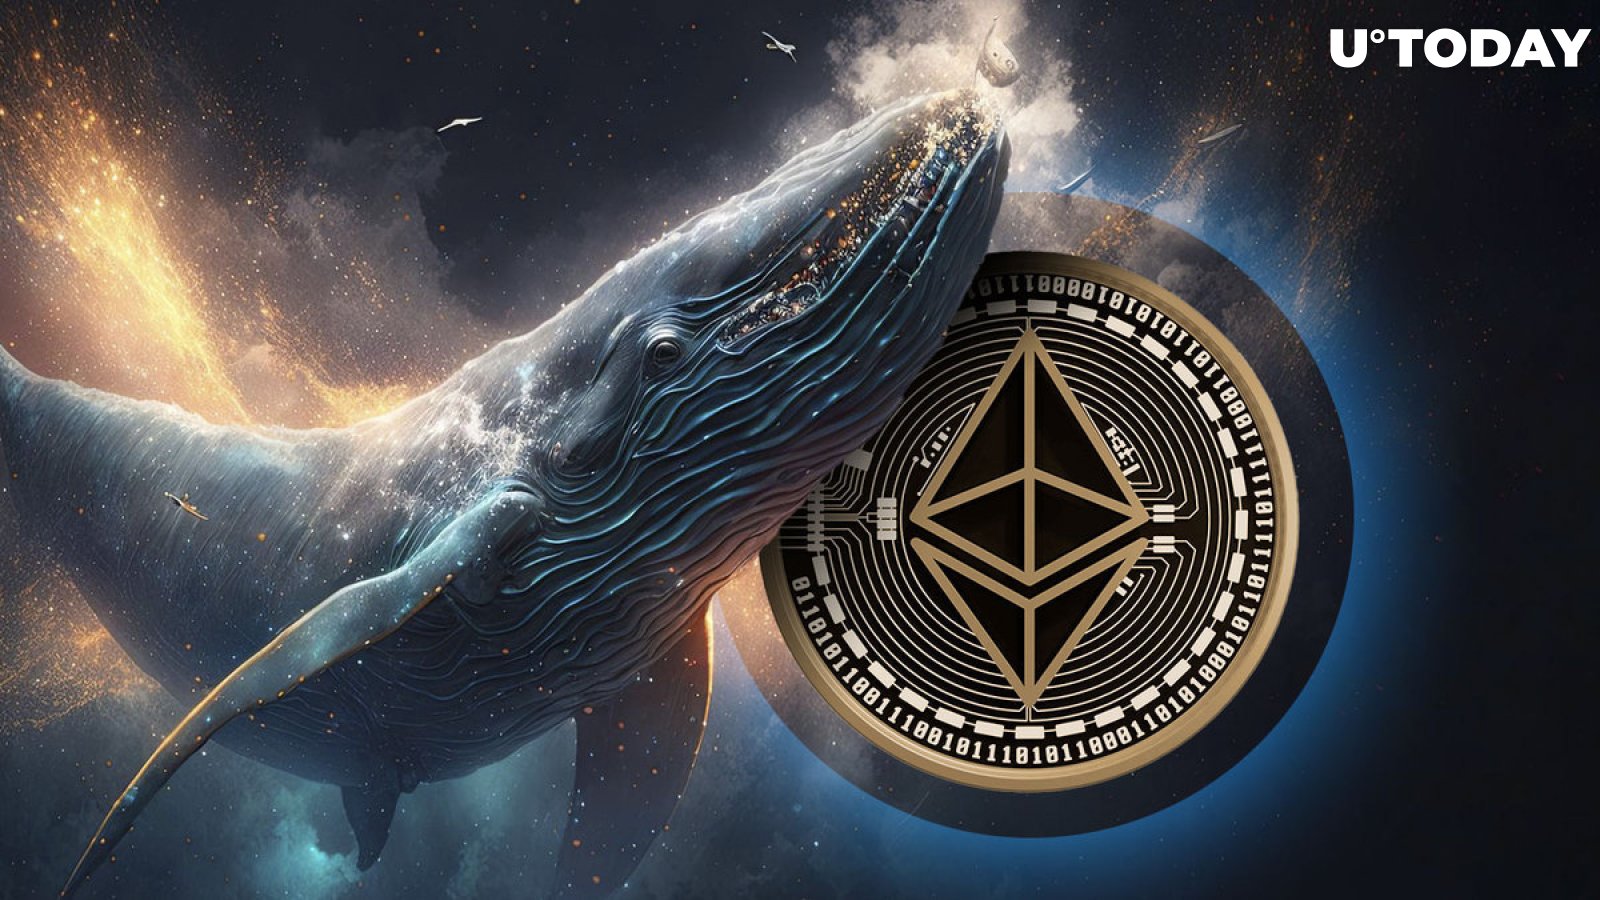 Ethereum: Whales Go on Huge ETH Buying Spree as Price Falls